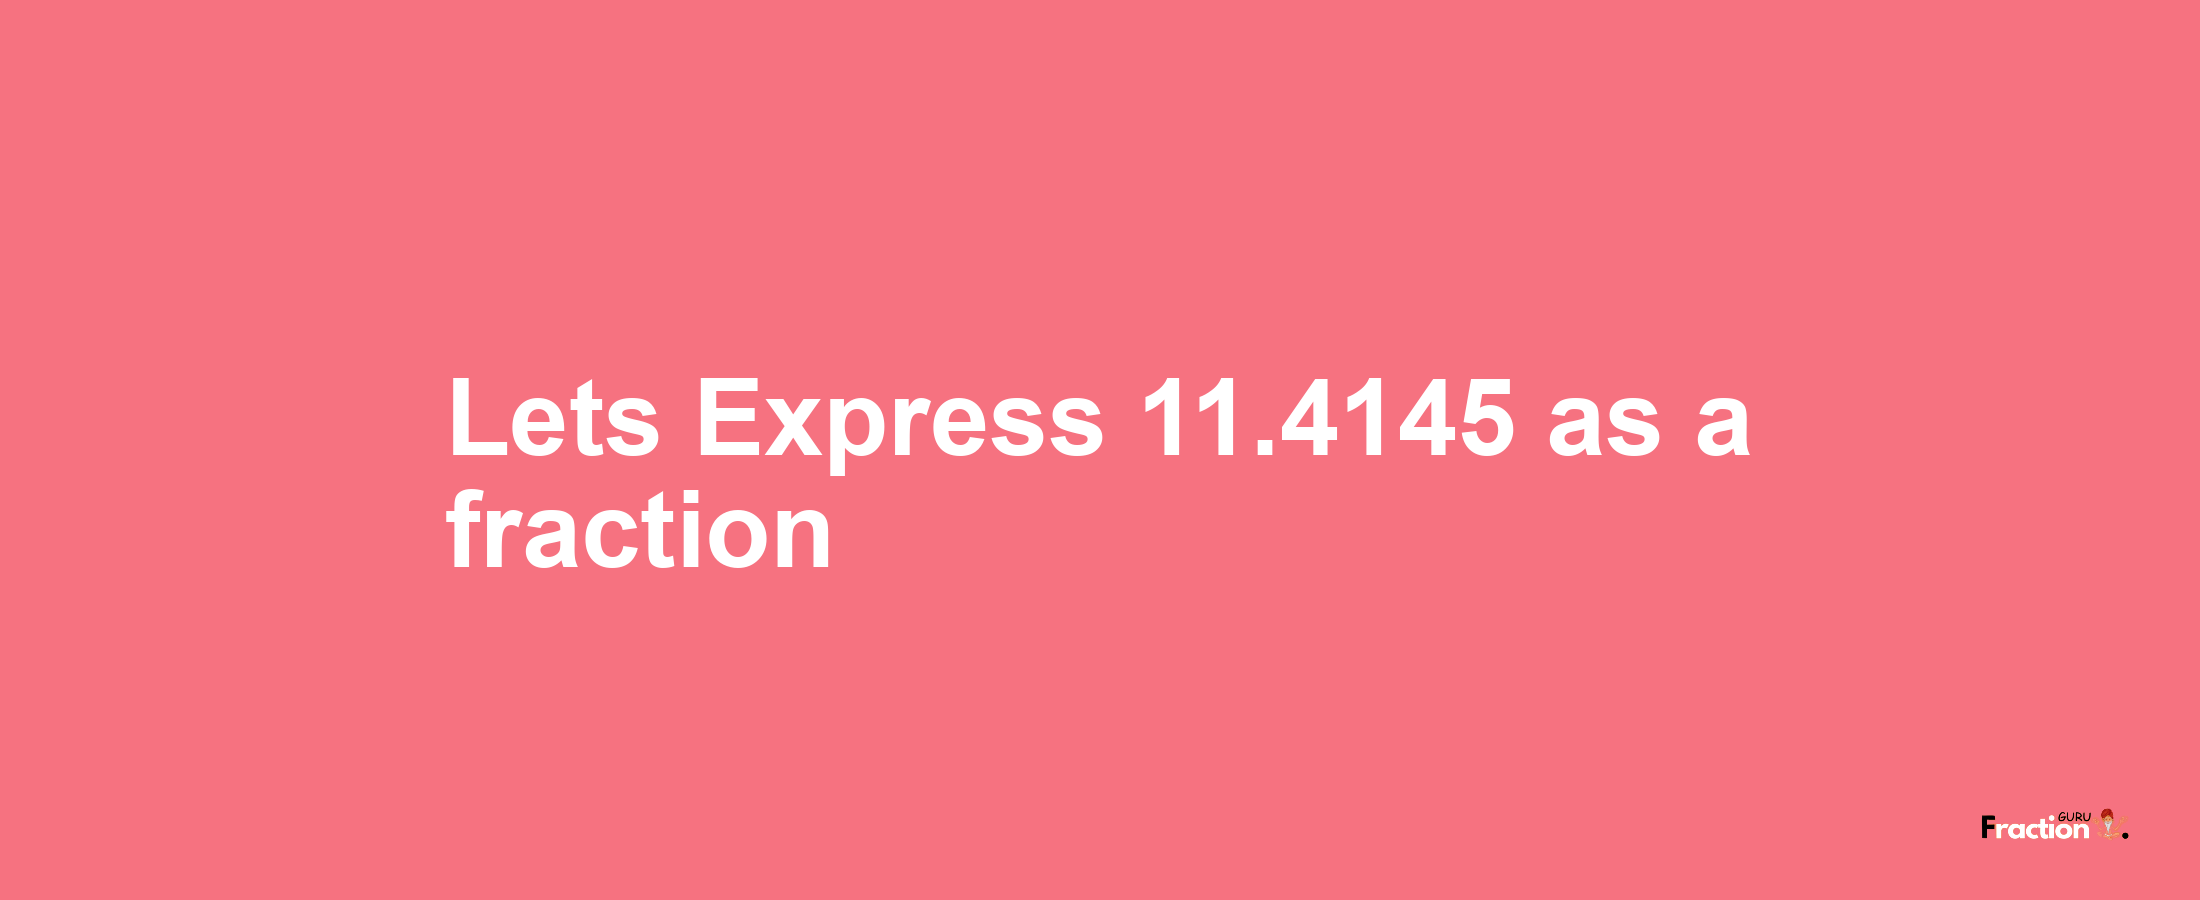 Lets Express 11.4145 as afraction